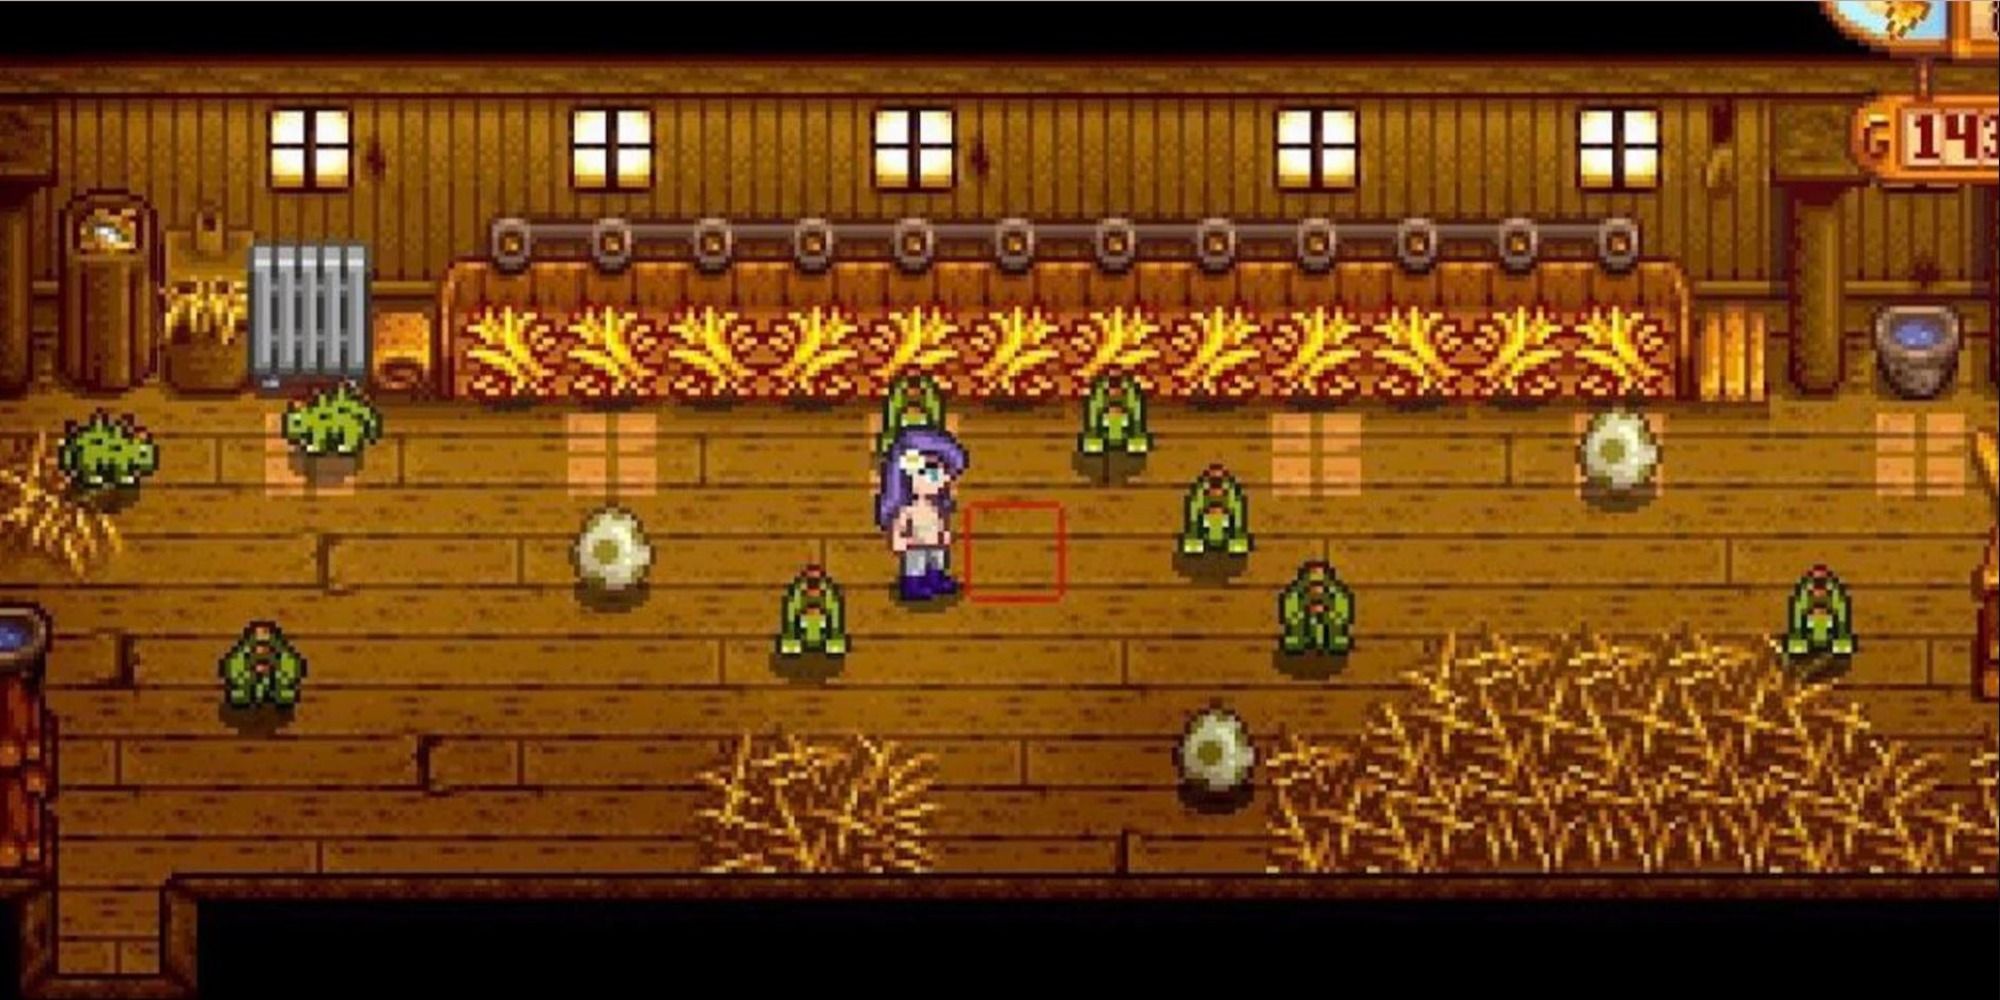 A player stands in a coop filled with dinosaurs and dinosaur eggs